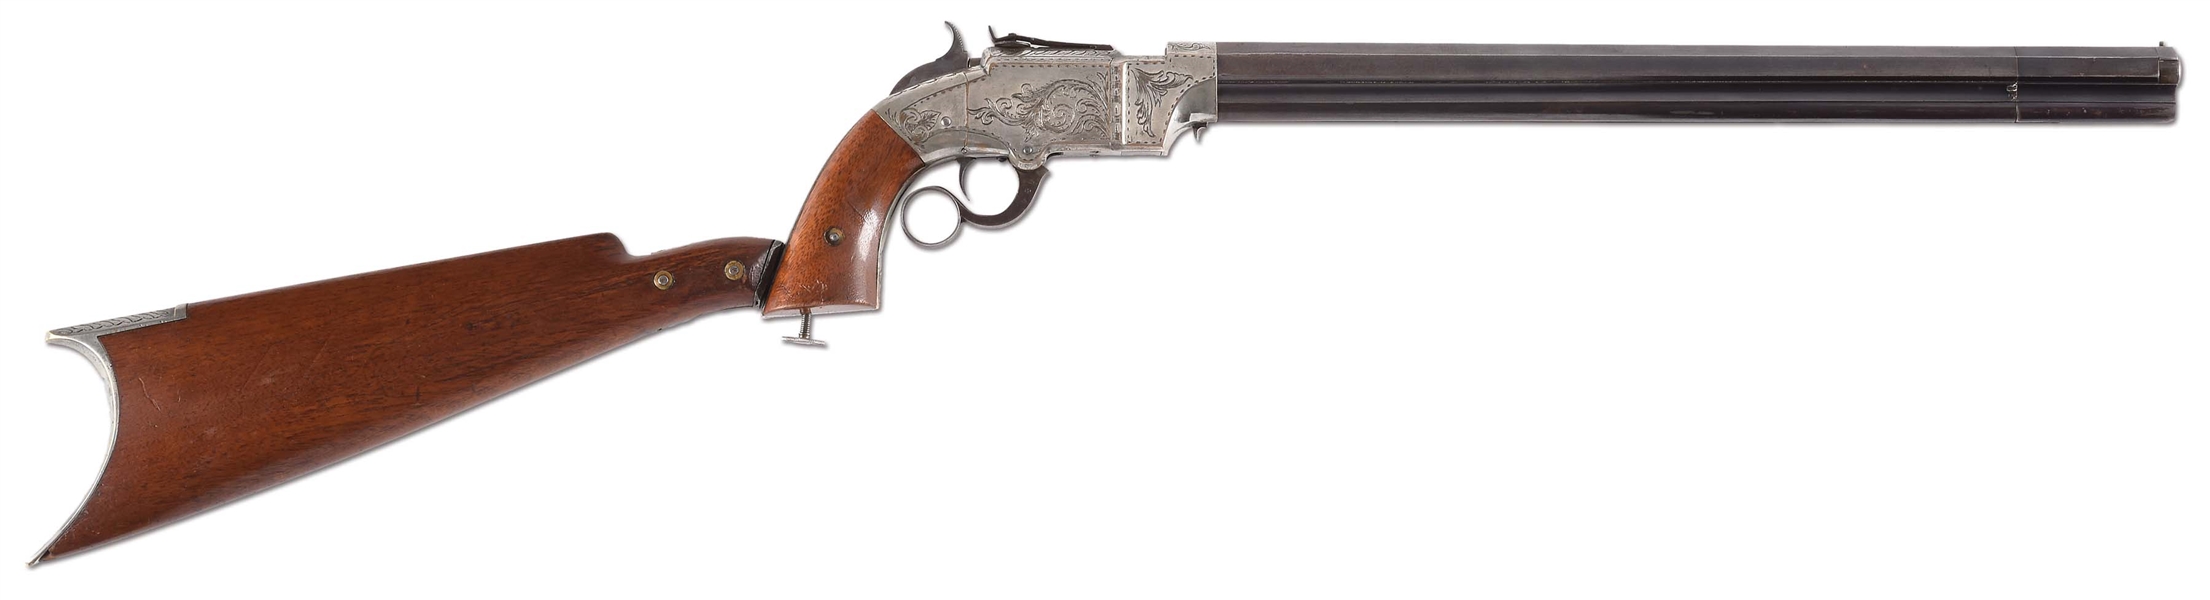 (A) VOLCANIC ARMS CO. LEVER ACTION PISTOL CARBINE.